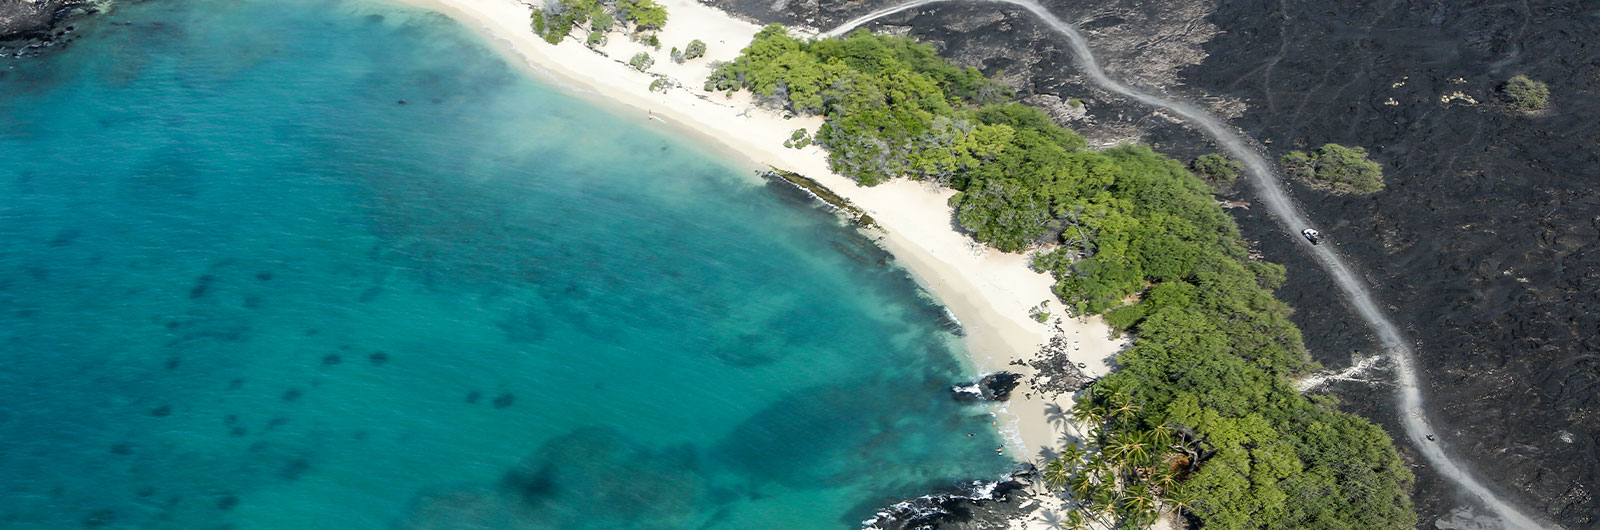 Top 5 Kona Helicopter Tours